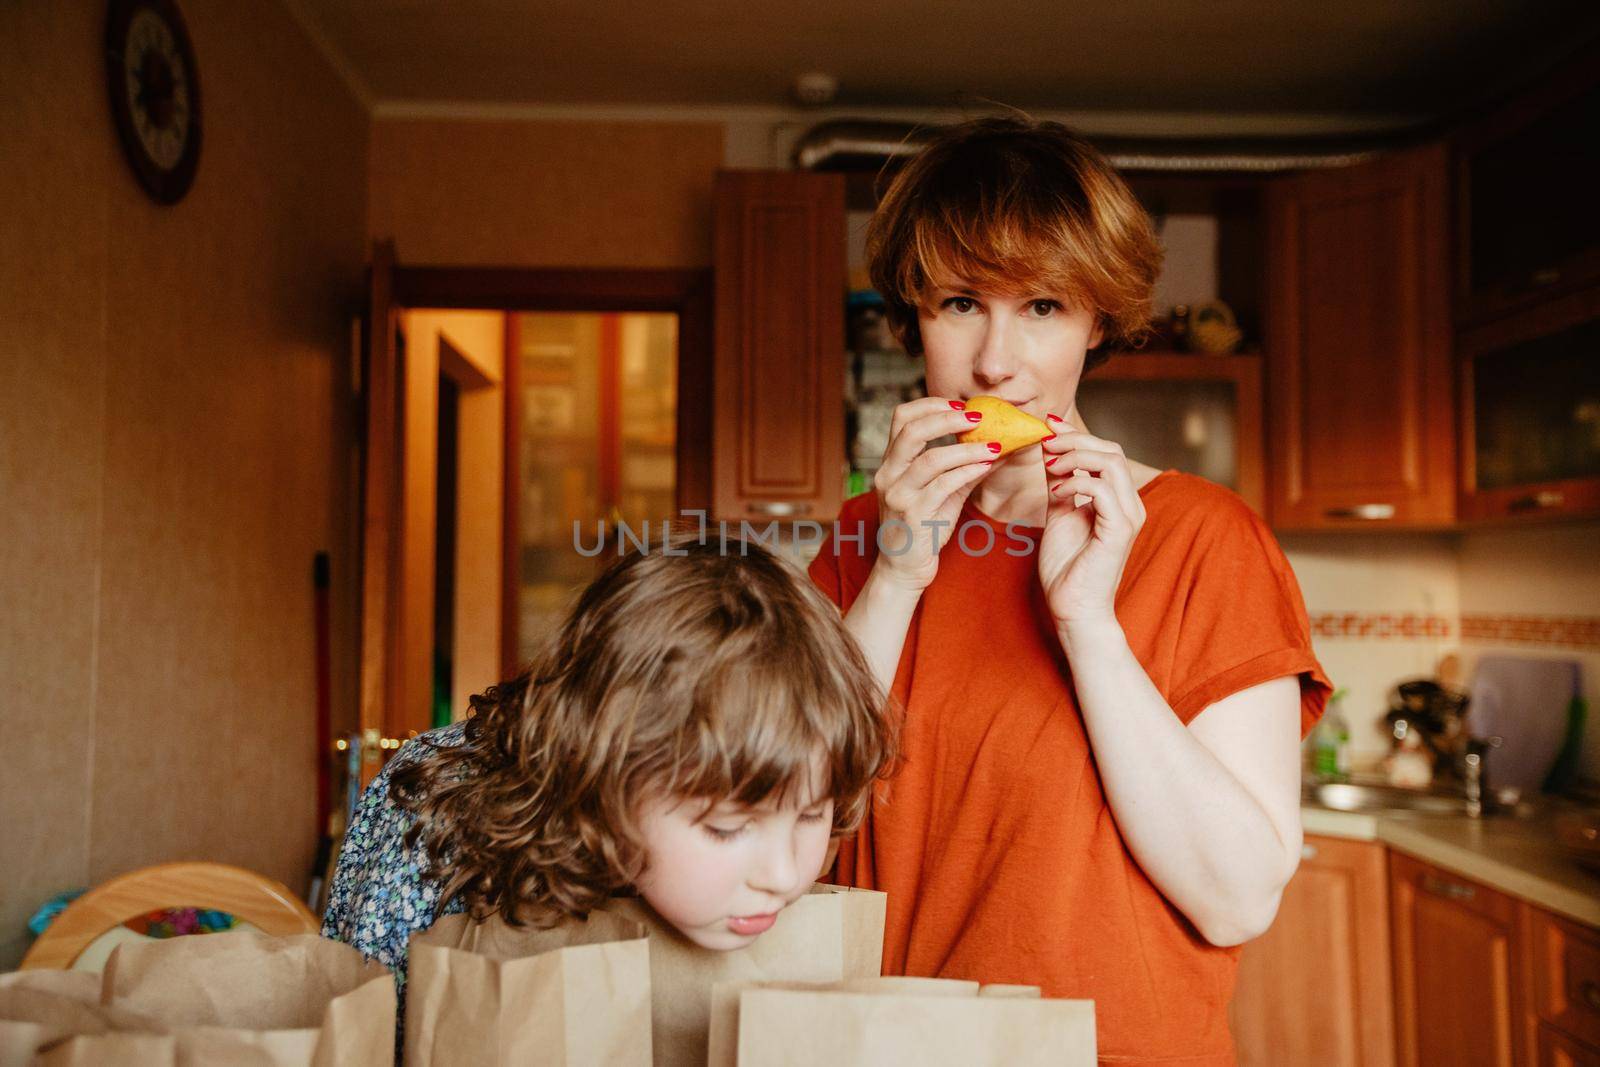 Woman and little girl standing together in kitchen with groceries in paper bags